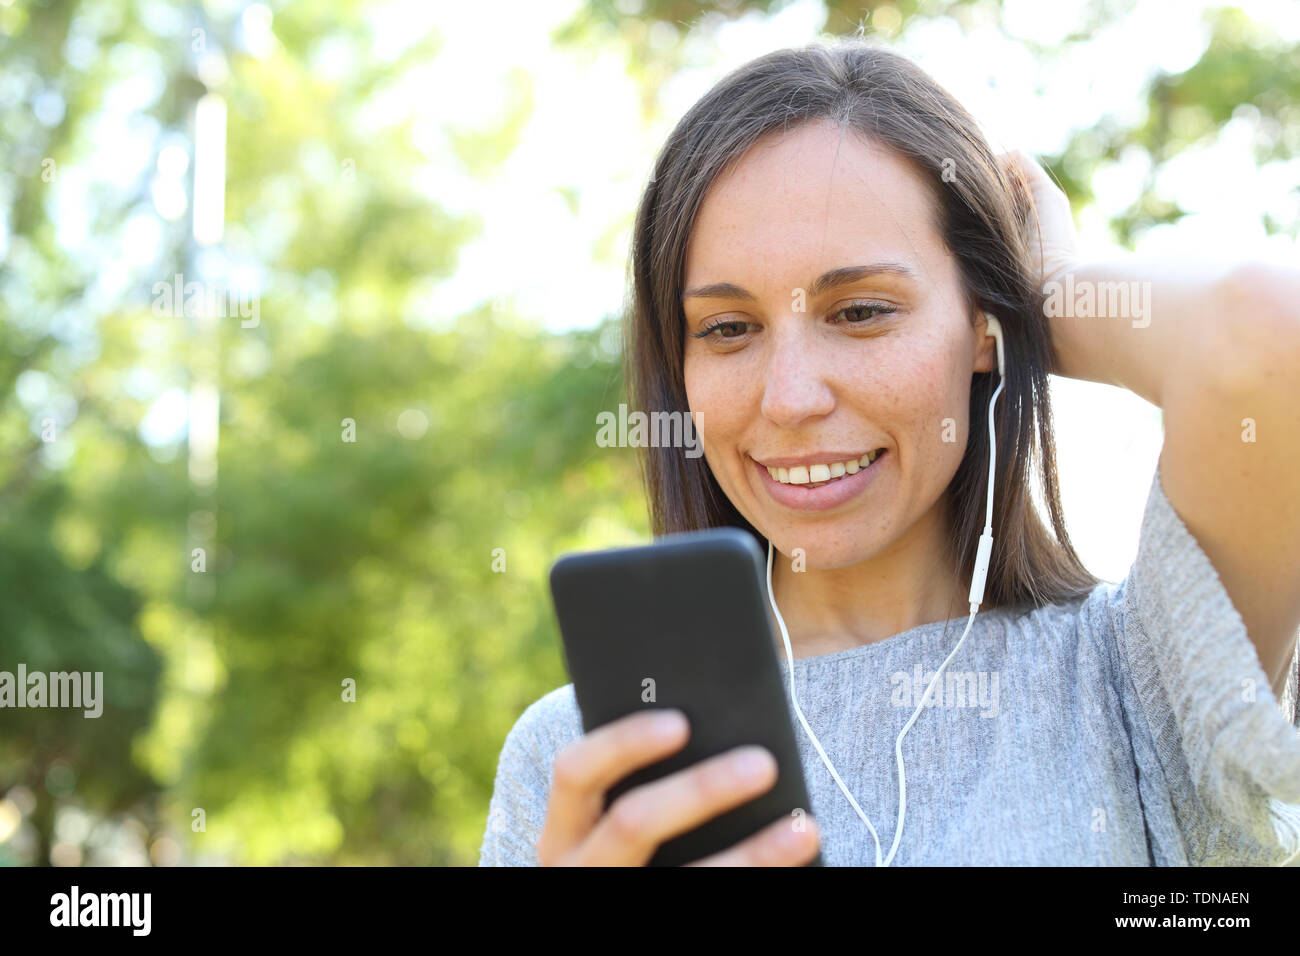 Happy adult woman wearing earphones listening to music checking smart phone standing in a park Stock Photo